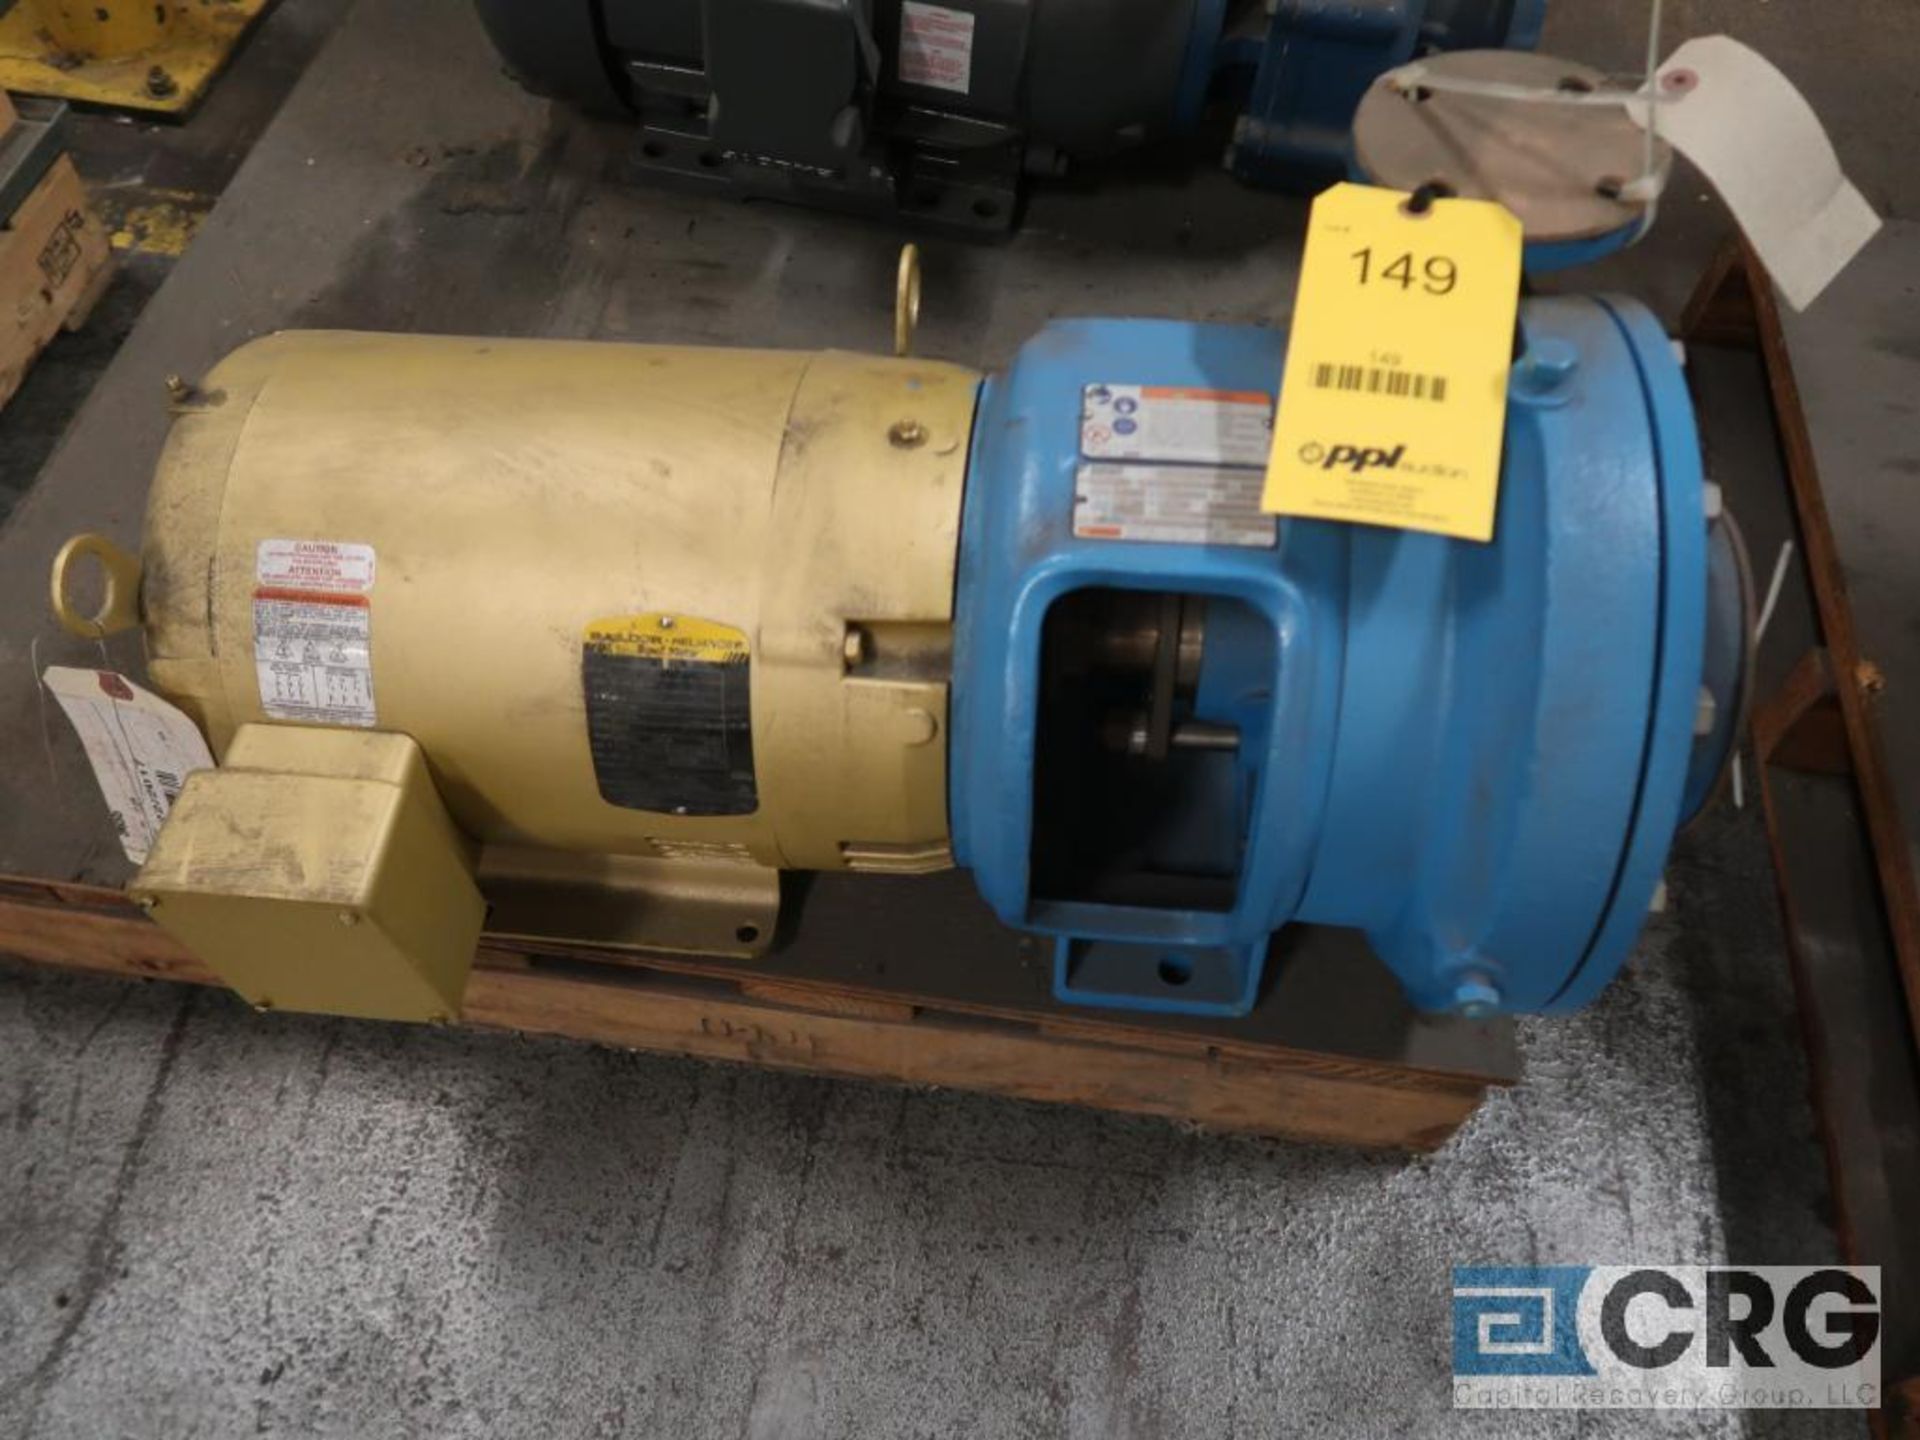 Goulds 3655 1.5 x 2-9 centrifugal pump with 15 HP motor, s/n N737 H622 (Loading Area)